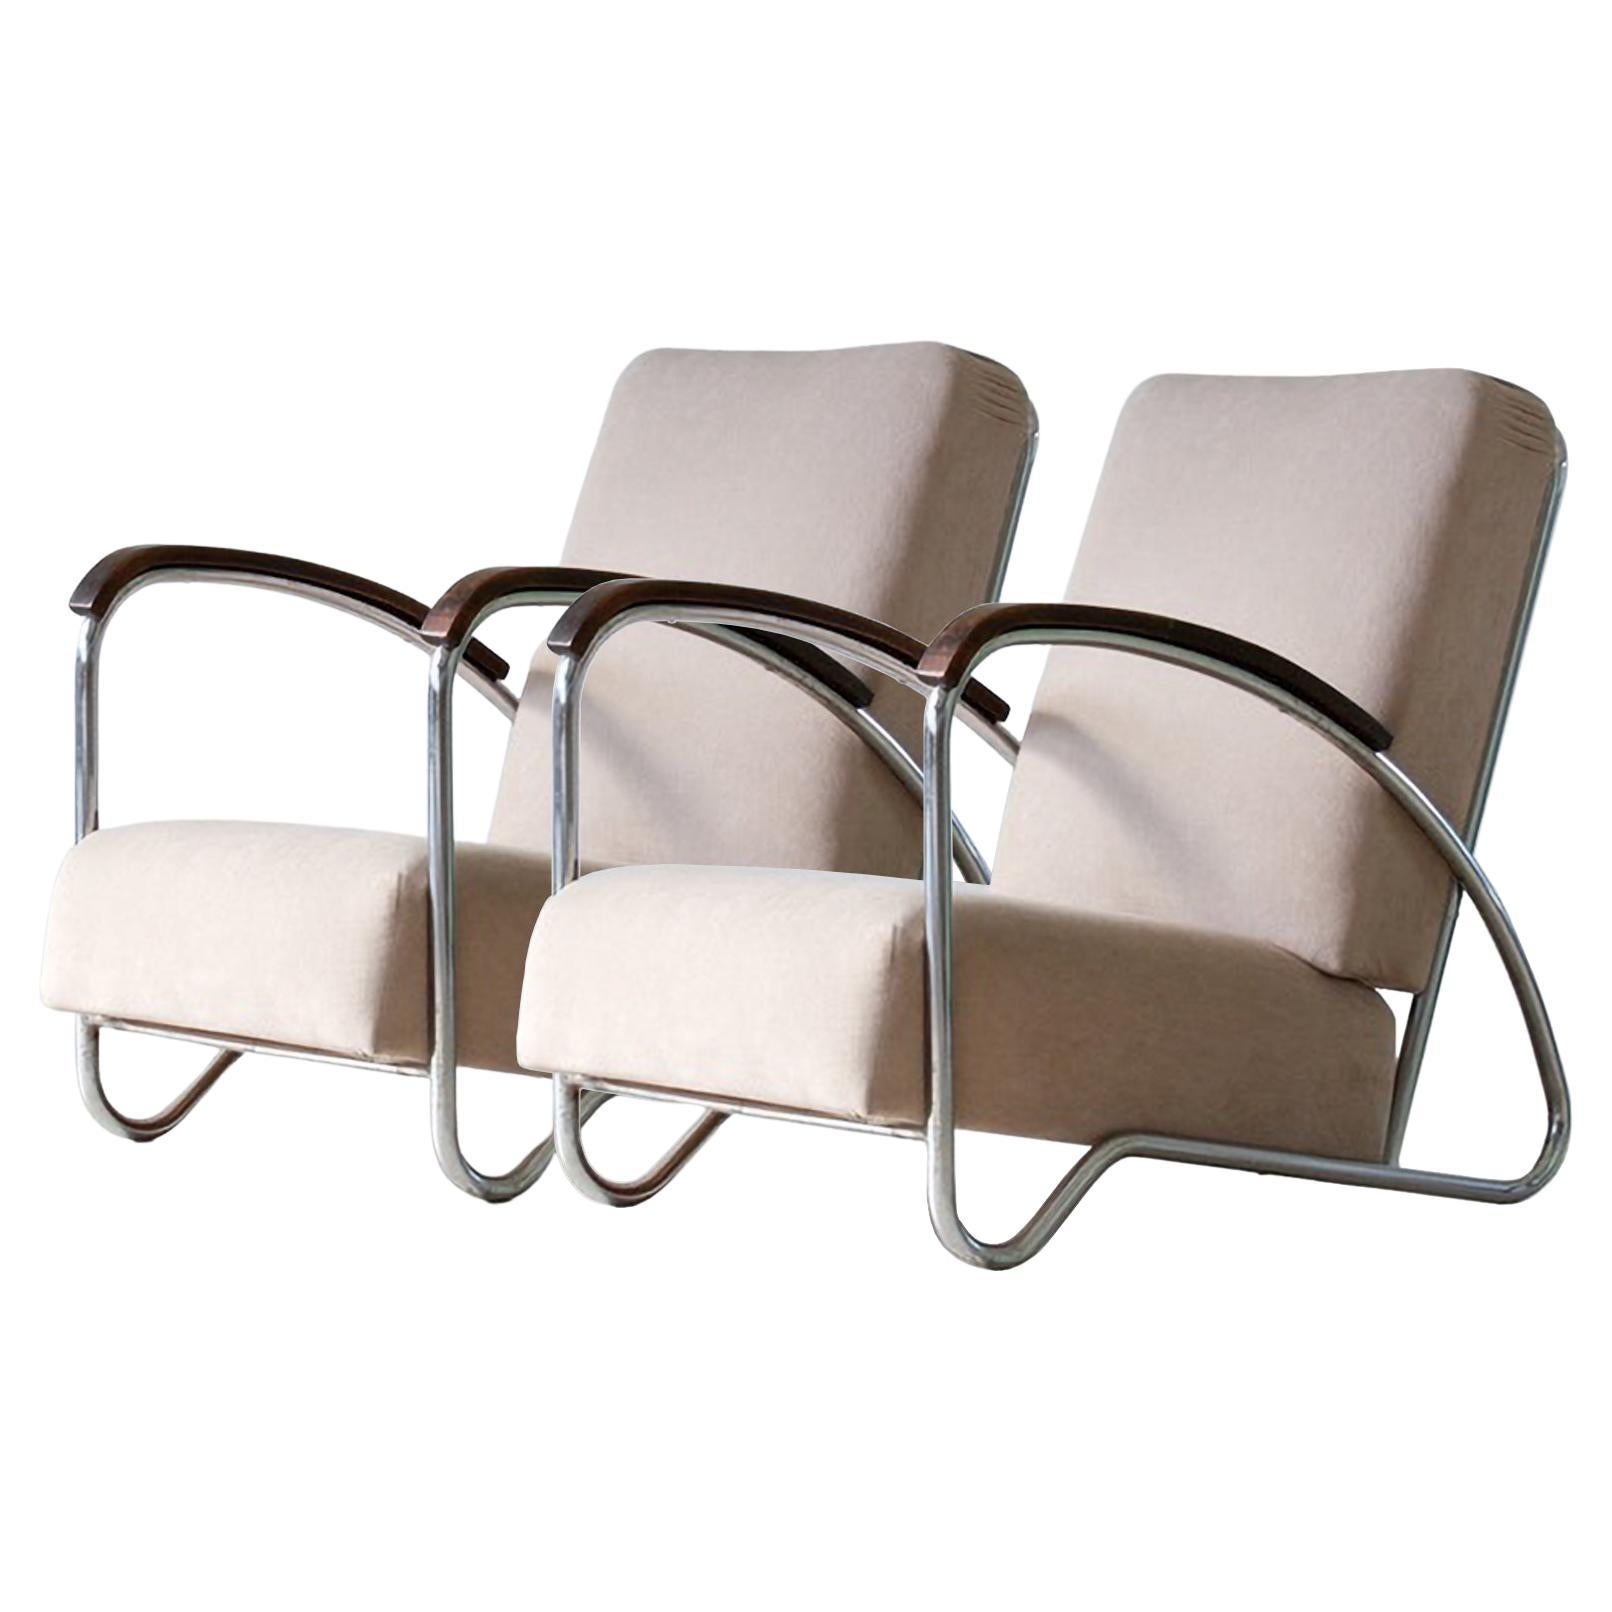 Modernist Tubular Steel Armchairs, Can Be Covered In Fabric Or Leather, c 1930